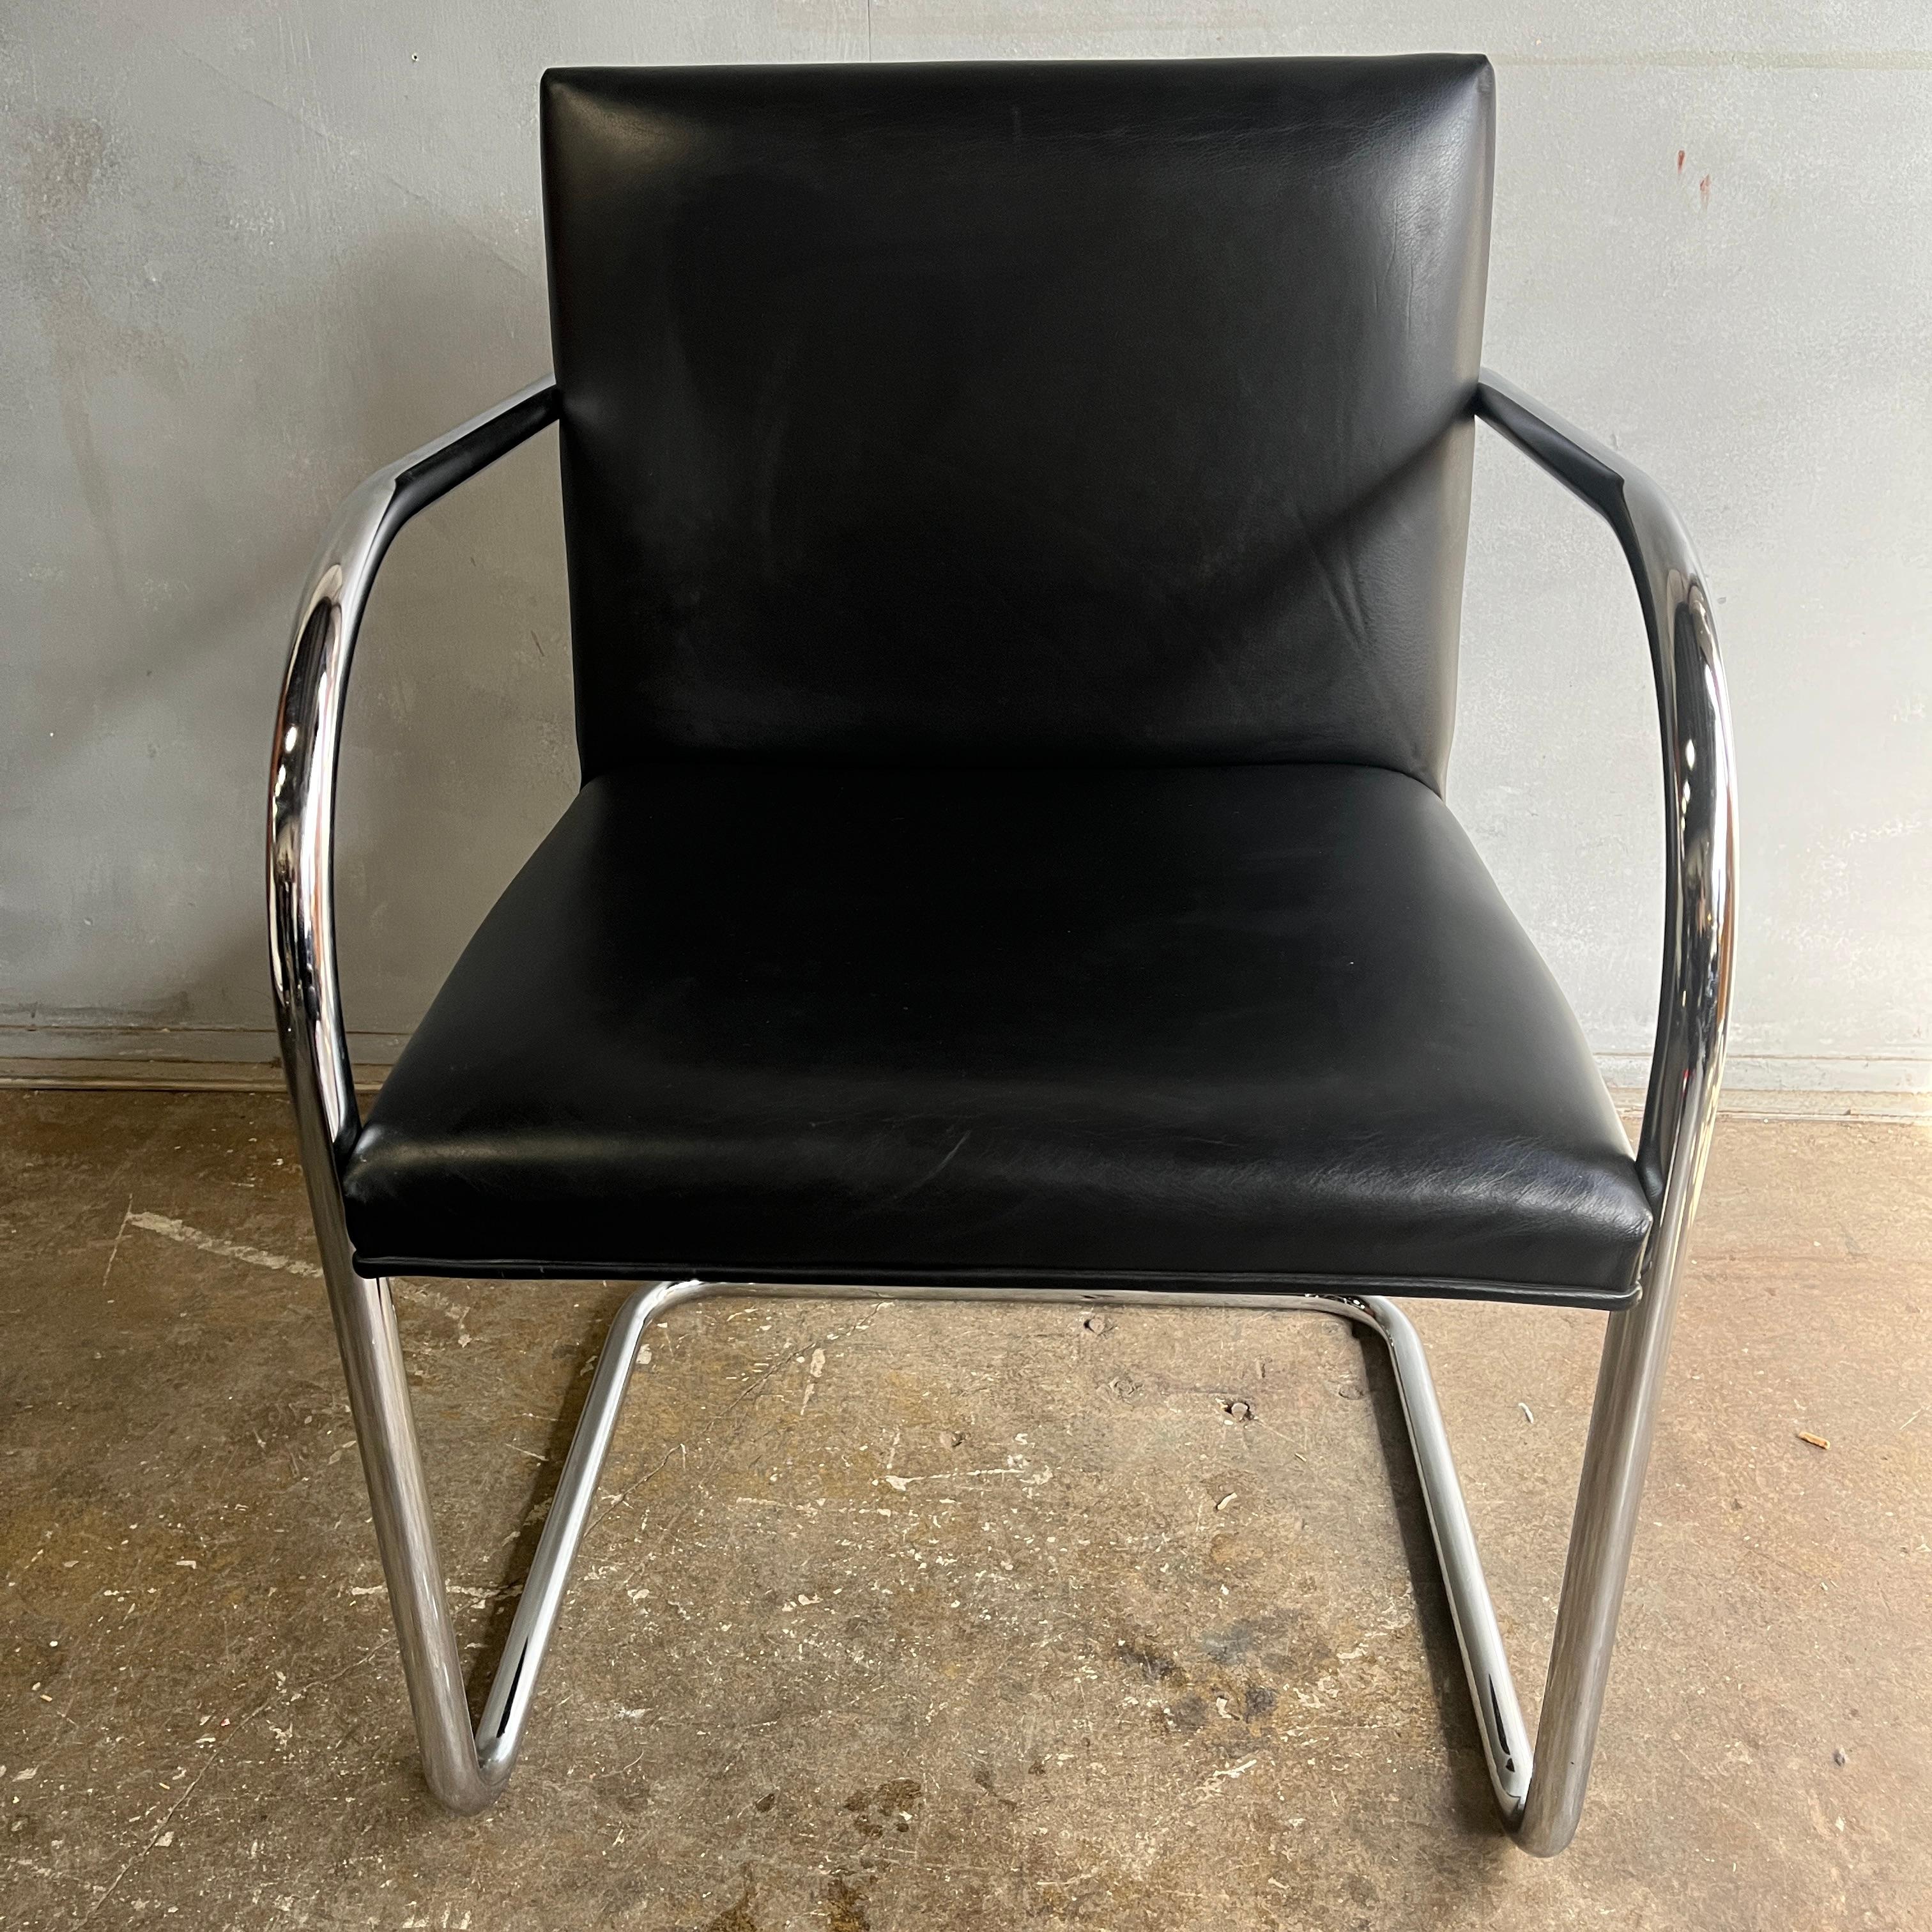 Leather Midcentury Knoll Brno Chair by Mies Van Der Rohe